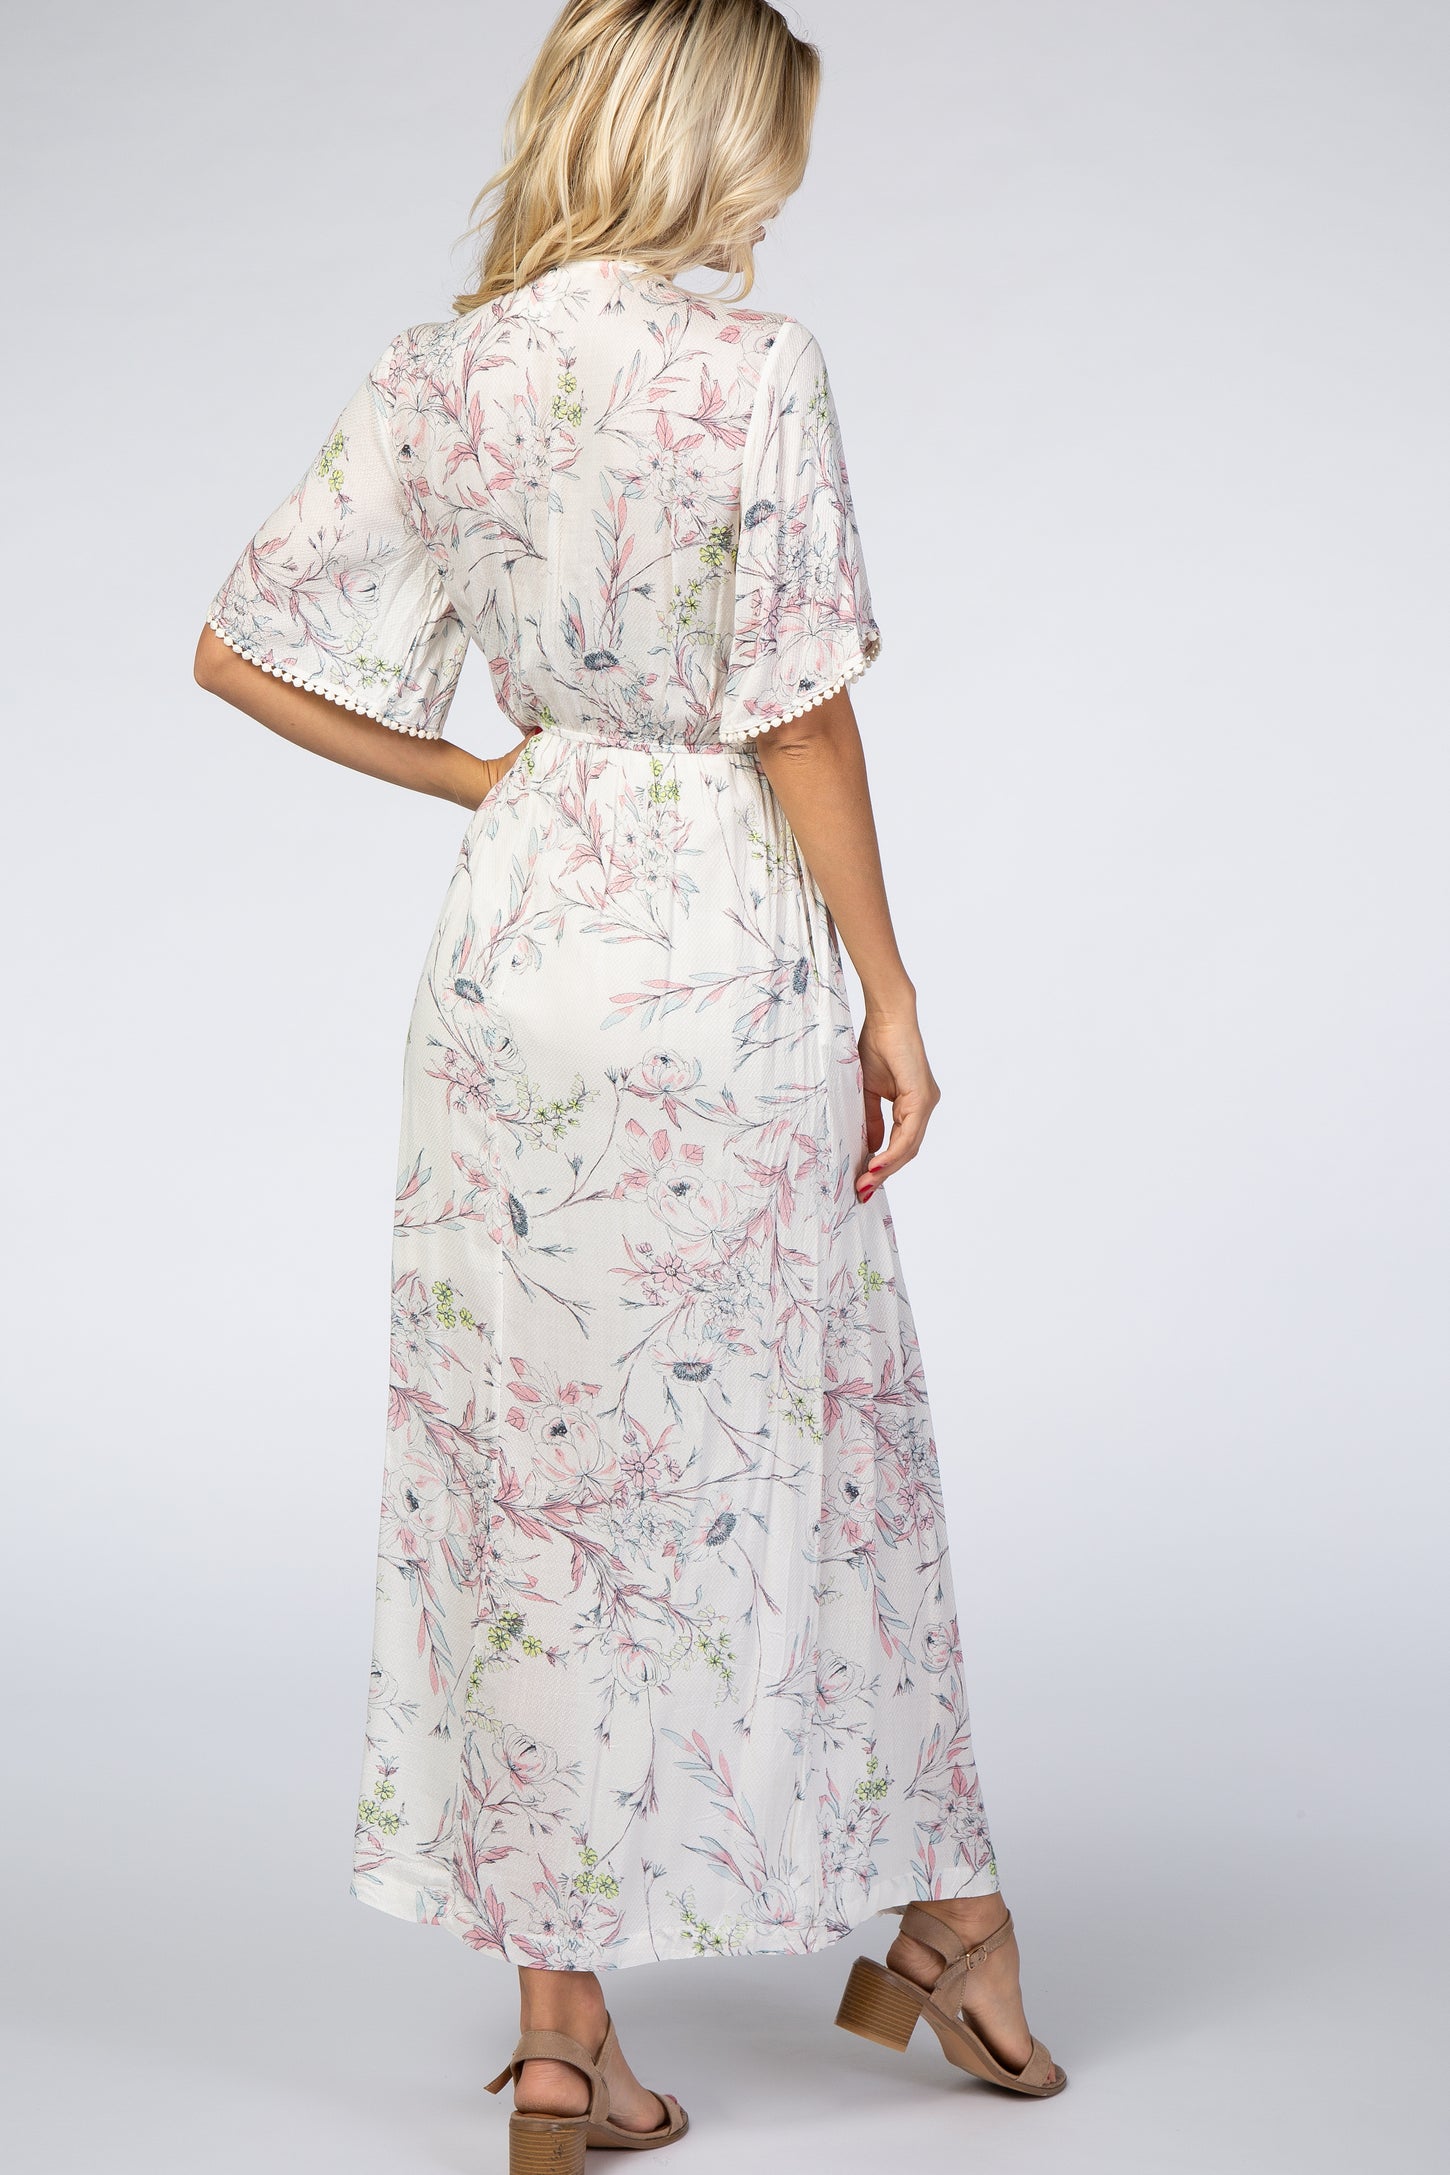 Ivory Floral Button Front Maxi Dress